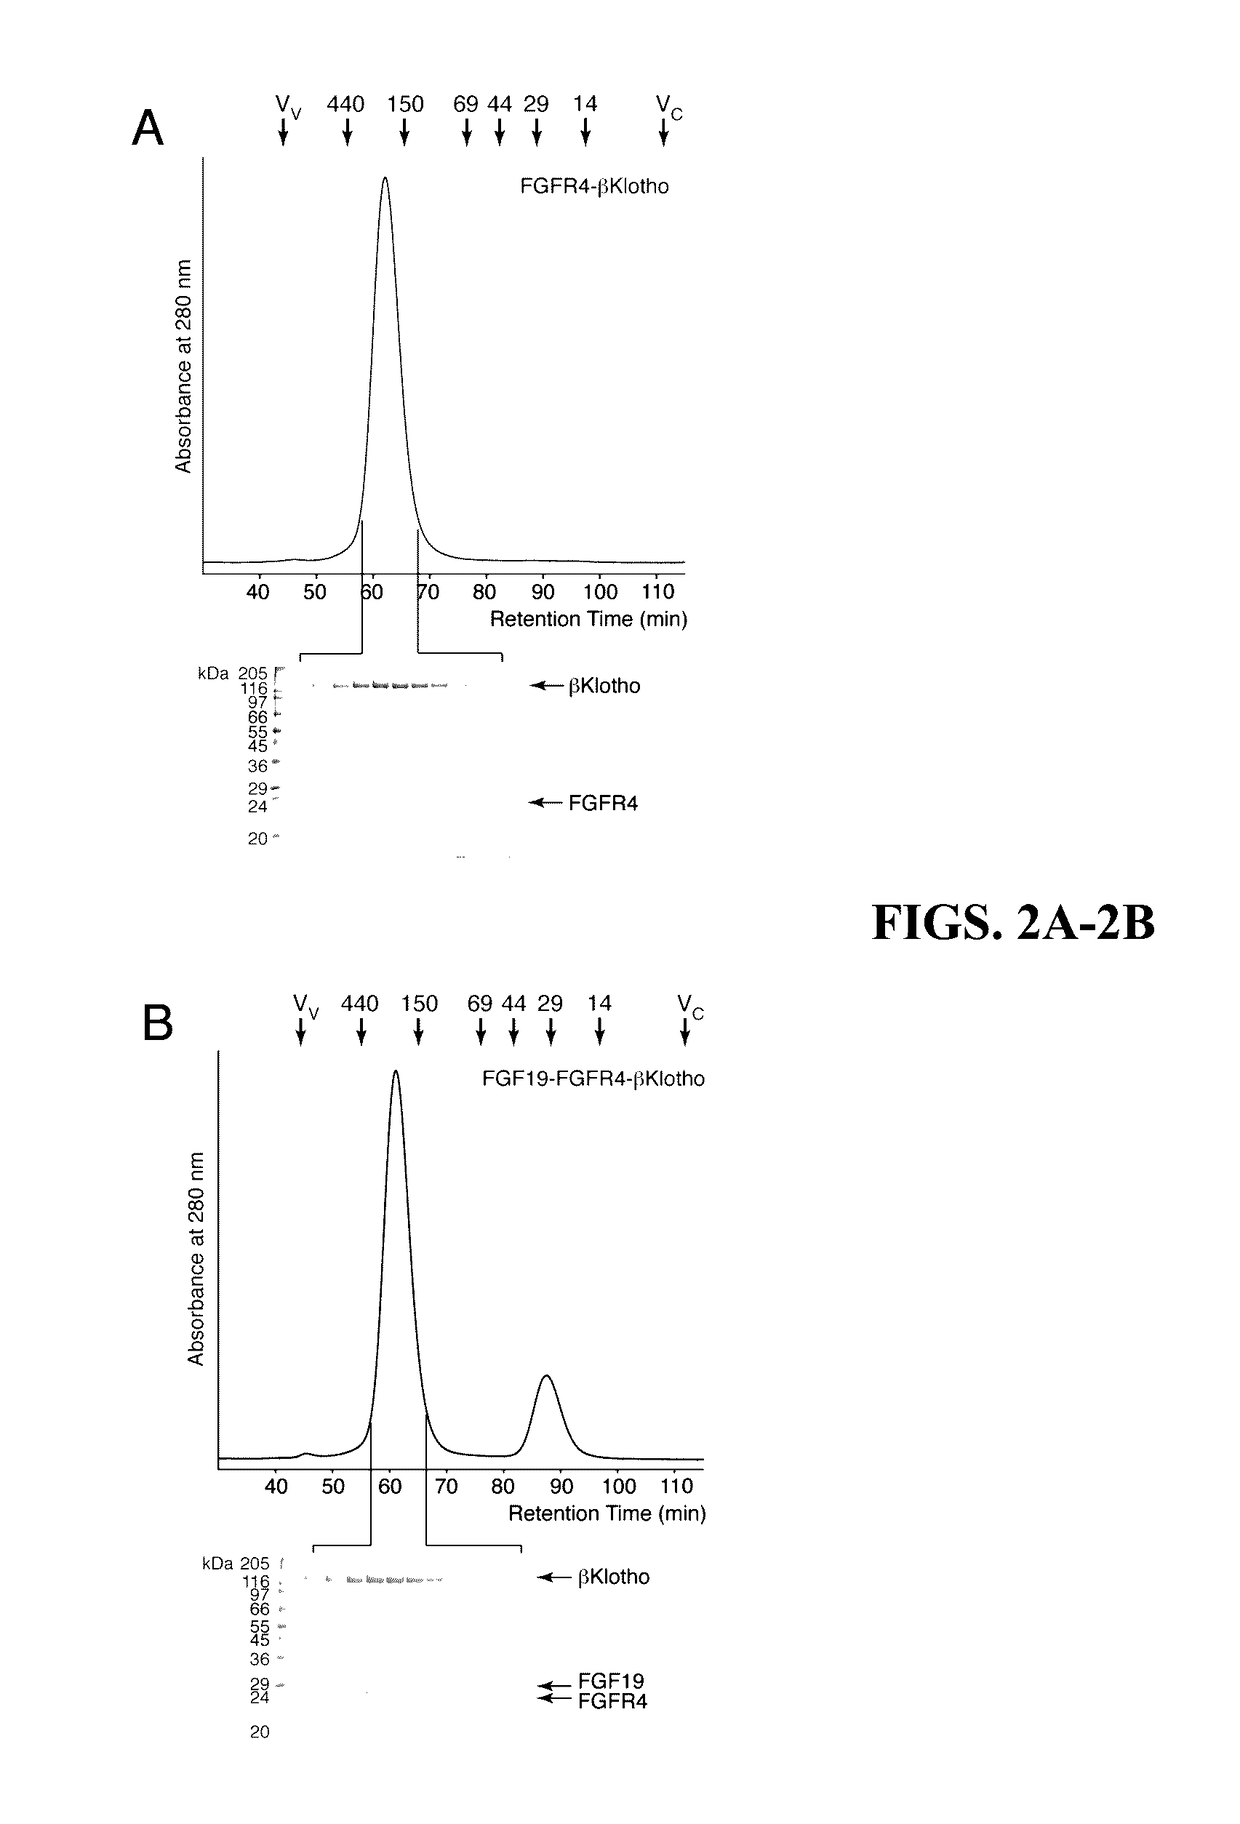 Chimeric fgf21 proteins with enhanced binding affinity for beta-klotho for the treatment of type ii diabetes, obesity, and related metabolic disorders